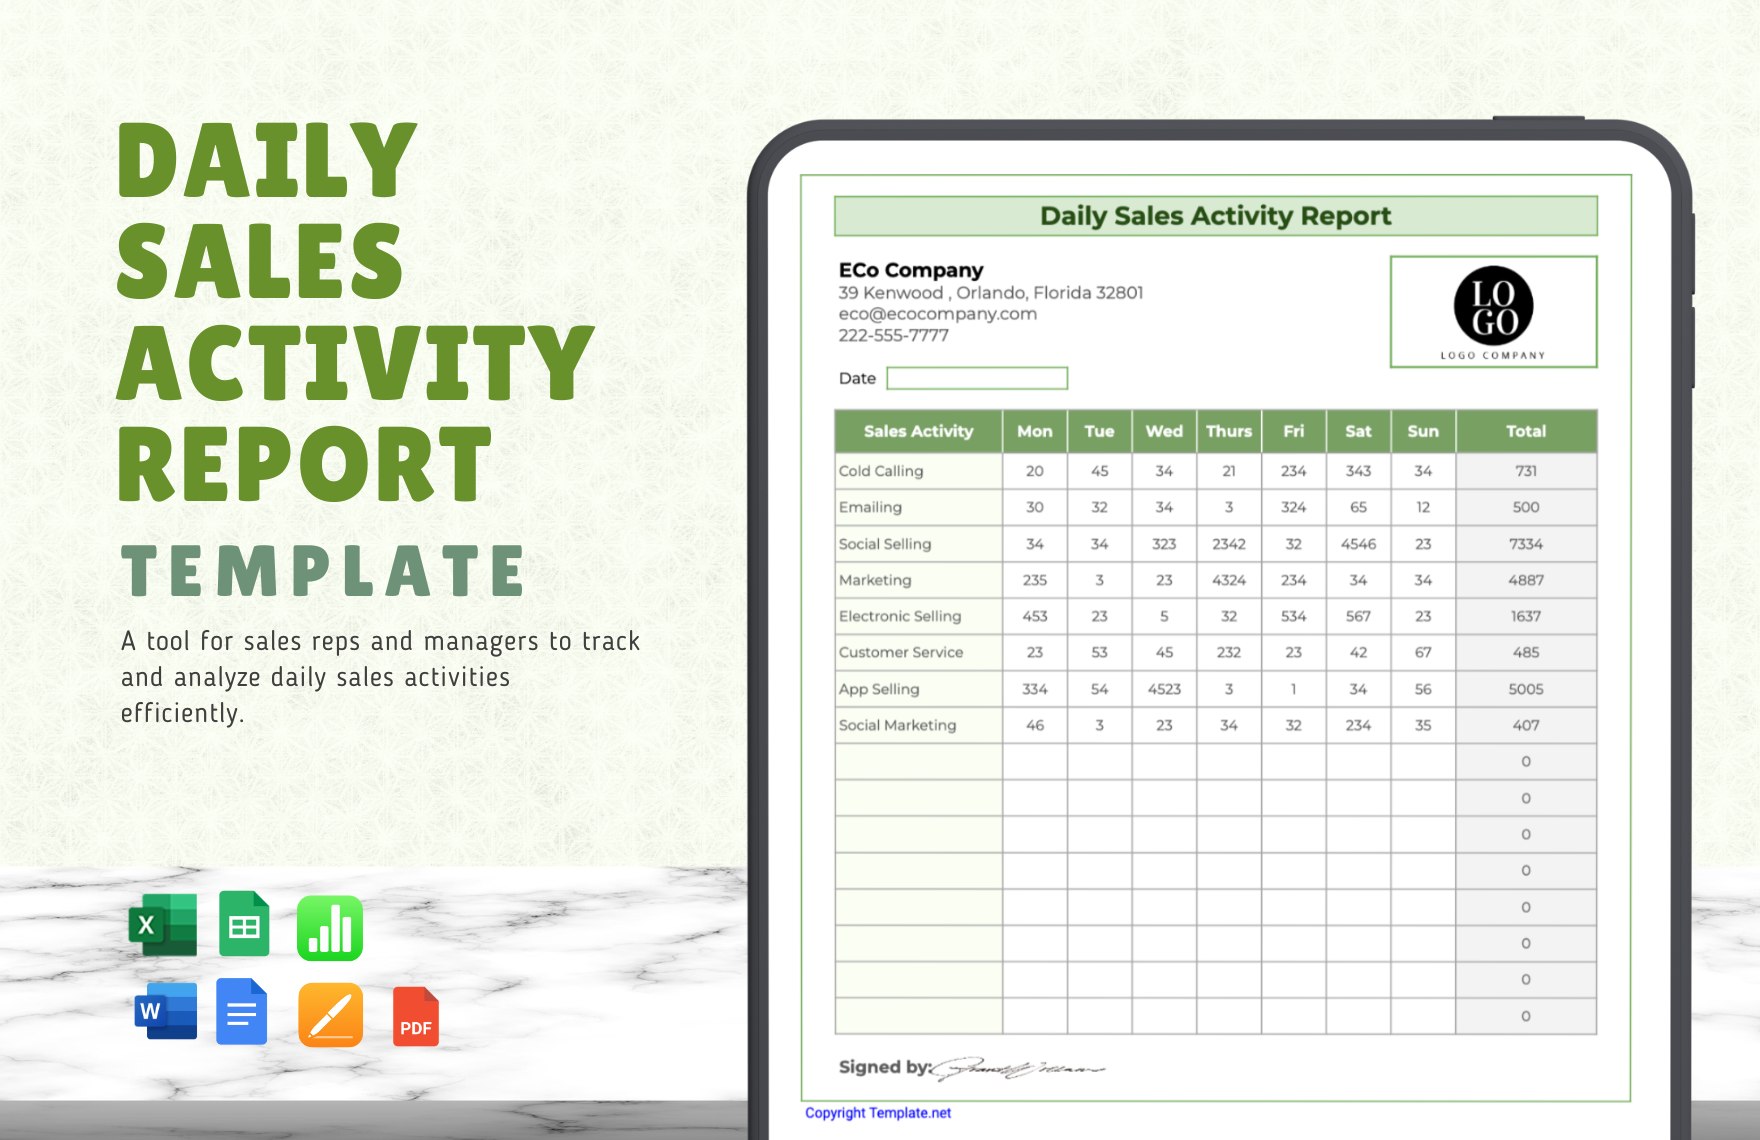 Daily Sales Activity Report Template in Word, Google Docs, Excel, PDF, Google Sheets, Apple Pages, Apple Numbers